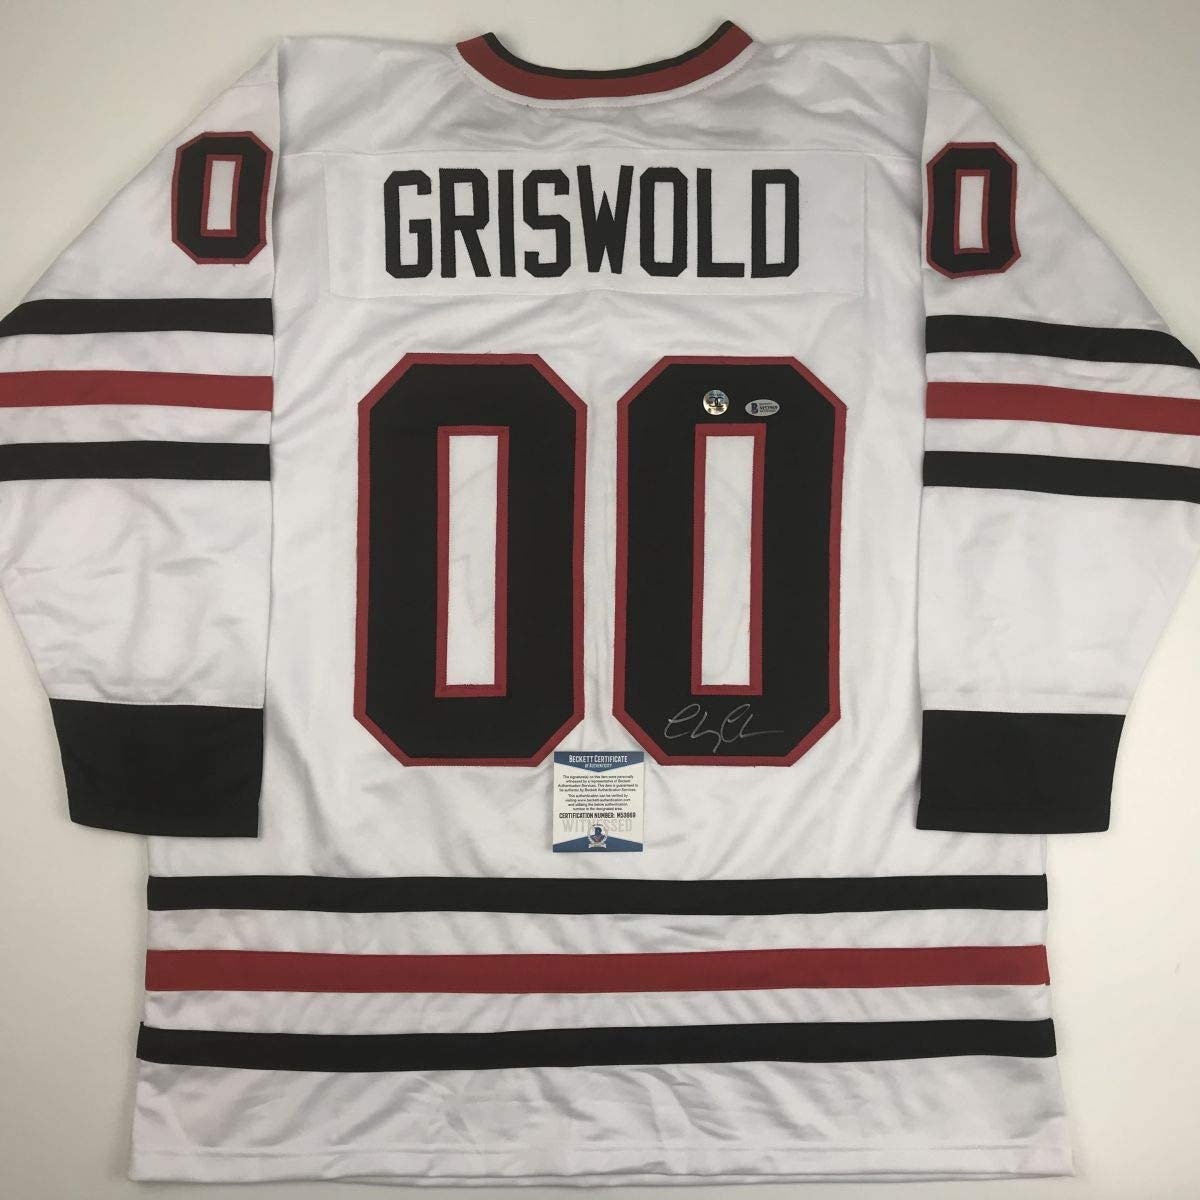 Clark Griswold Hockey Jersey Embroidered Christmas Vacation 00 Movie Chicago